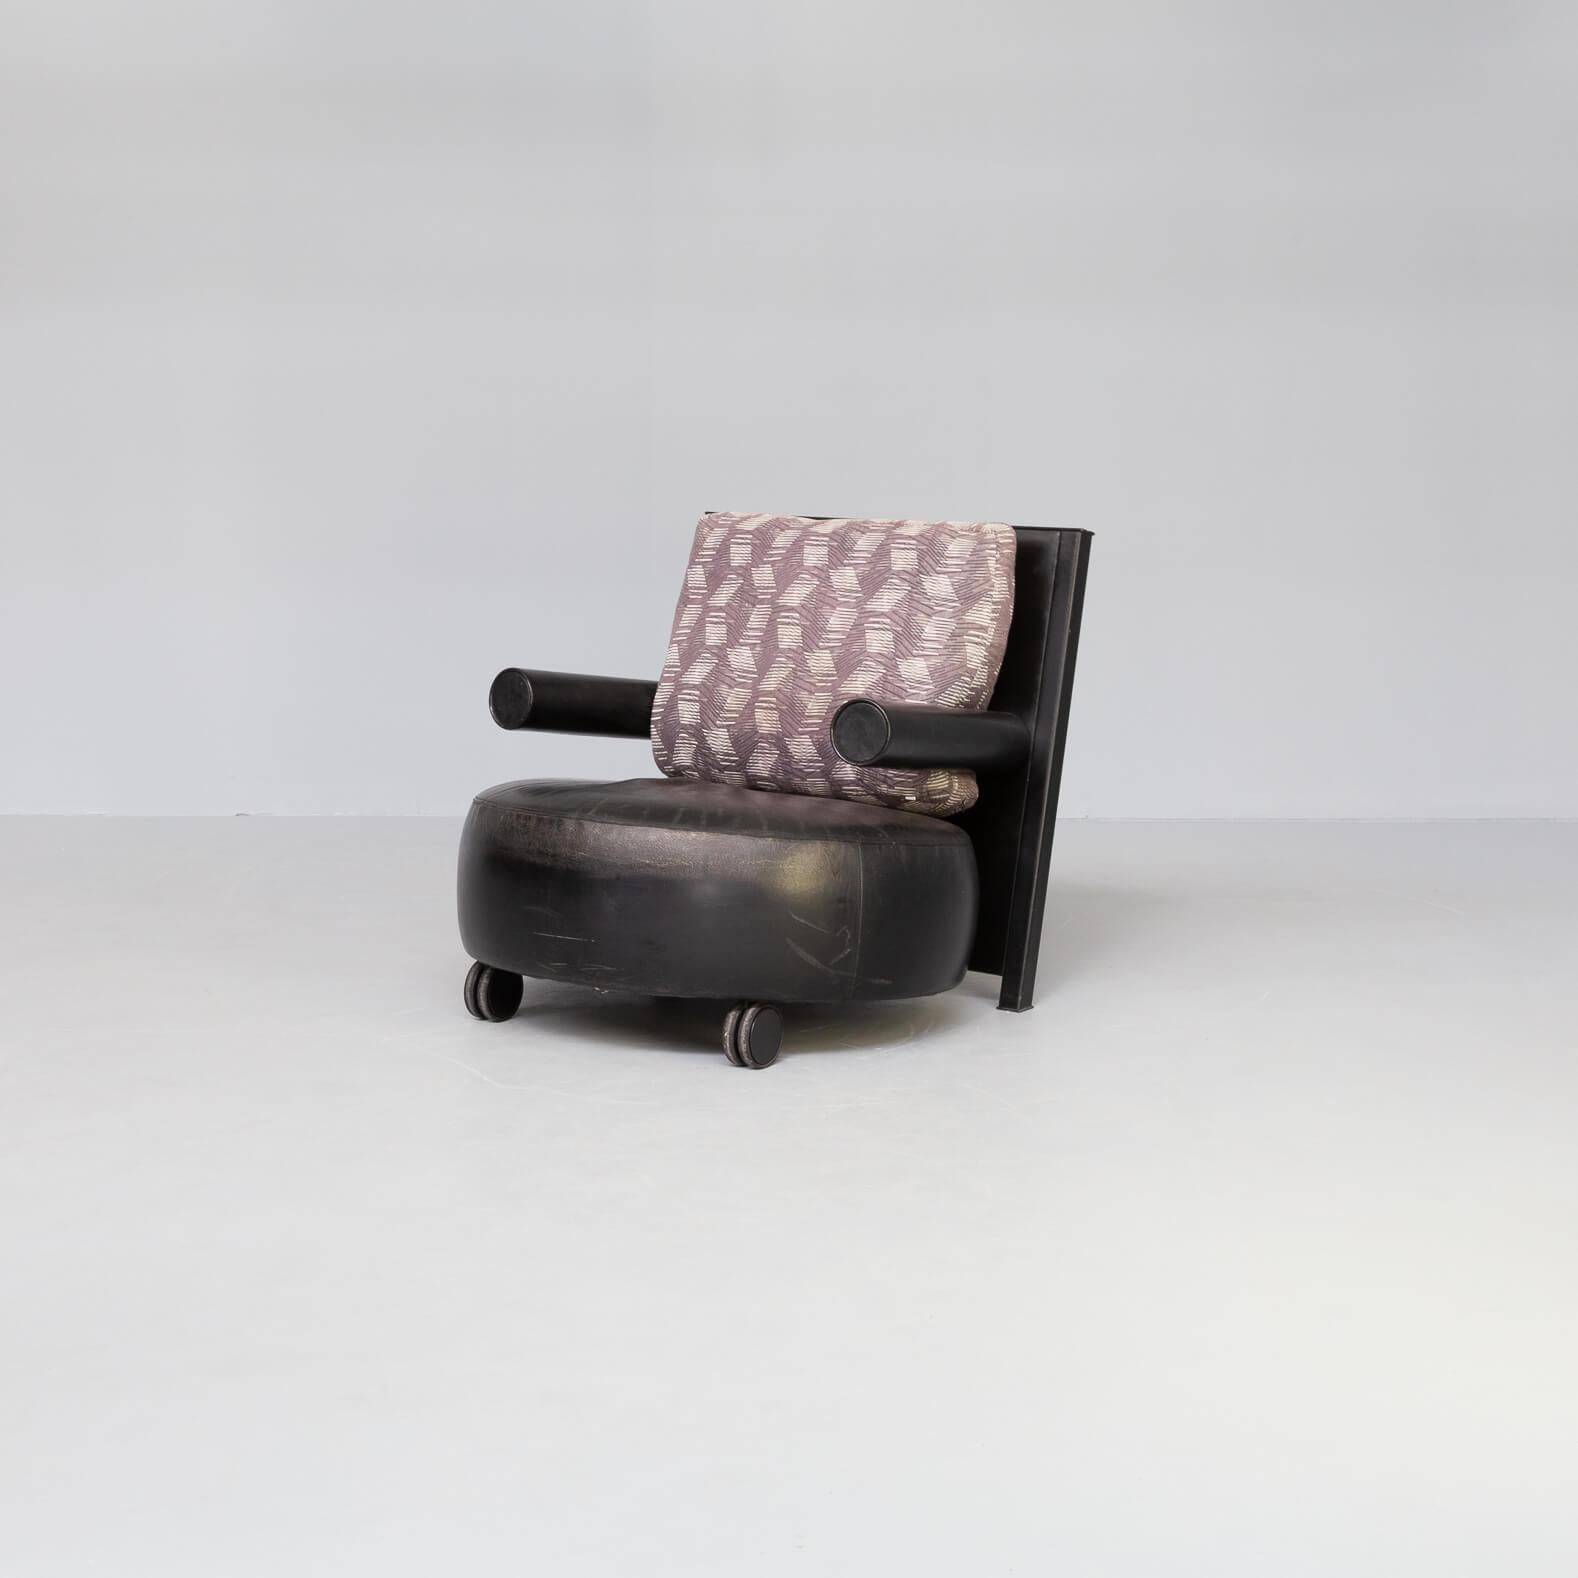 A single-seater fauteuil model Baisity created in 1986 by Antonio Citterio who won the Compasso d’oro a year later with this design. Beautiful and comfortabel seating. The chair has two wheel upfront so it can easily moved to another position in